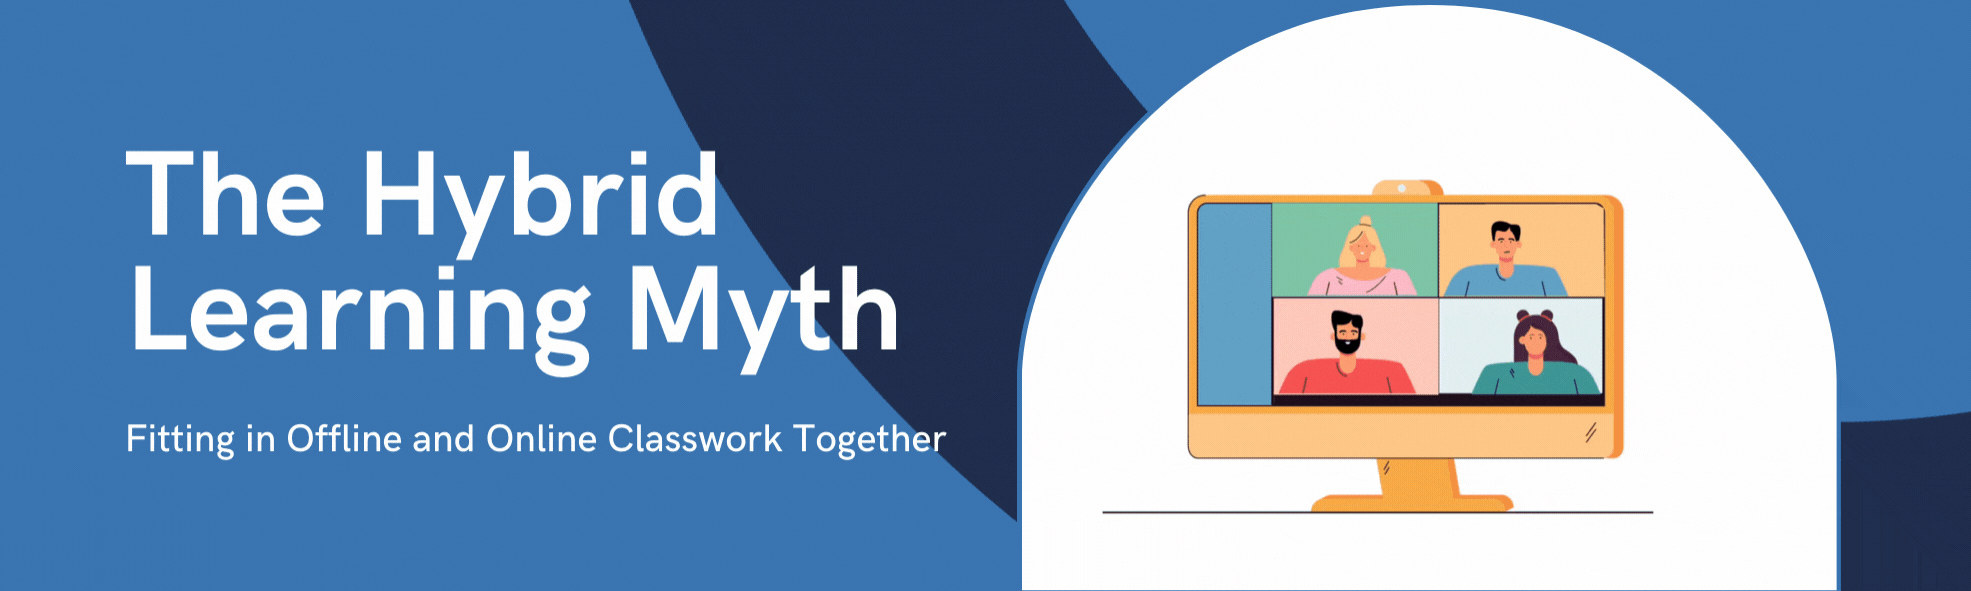 The Hybrid Learning Myth: Fitting in Offline and Online Classwork Together